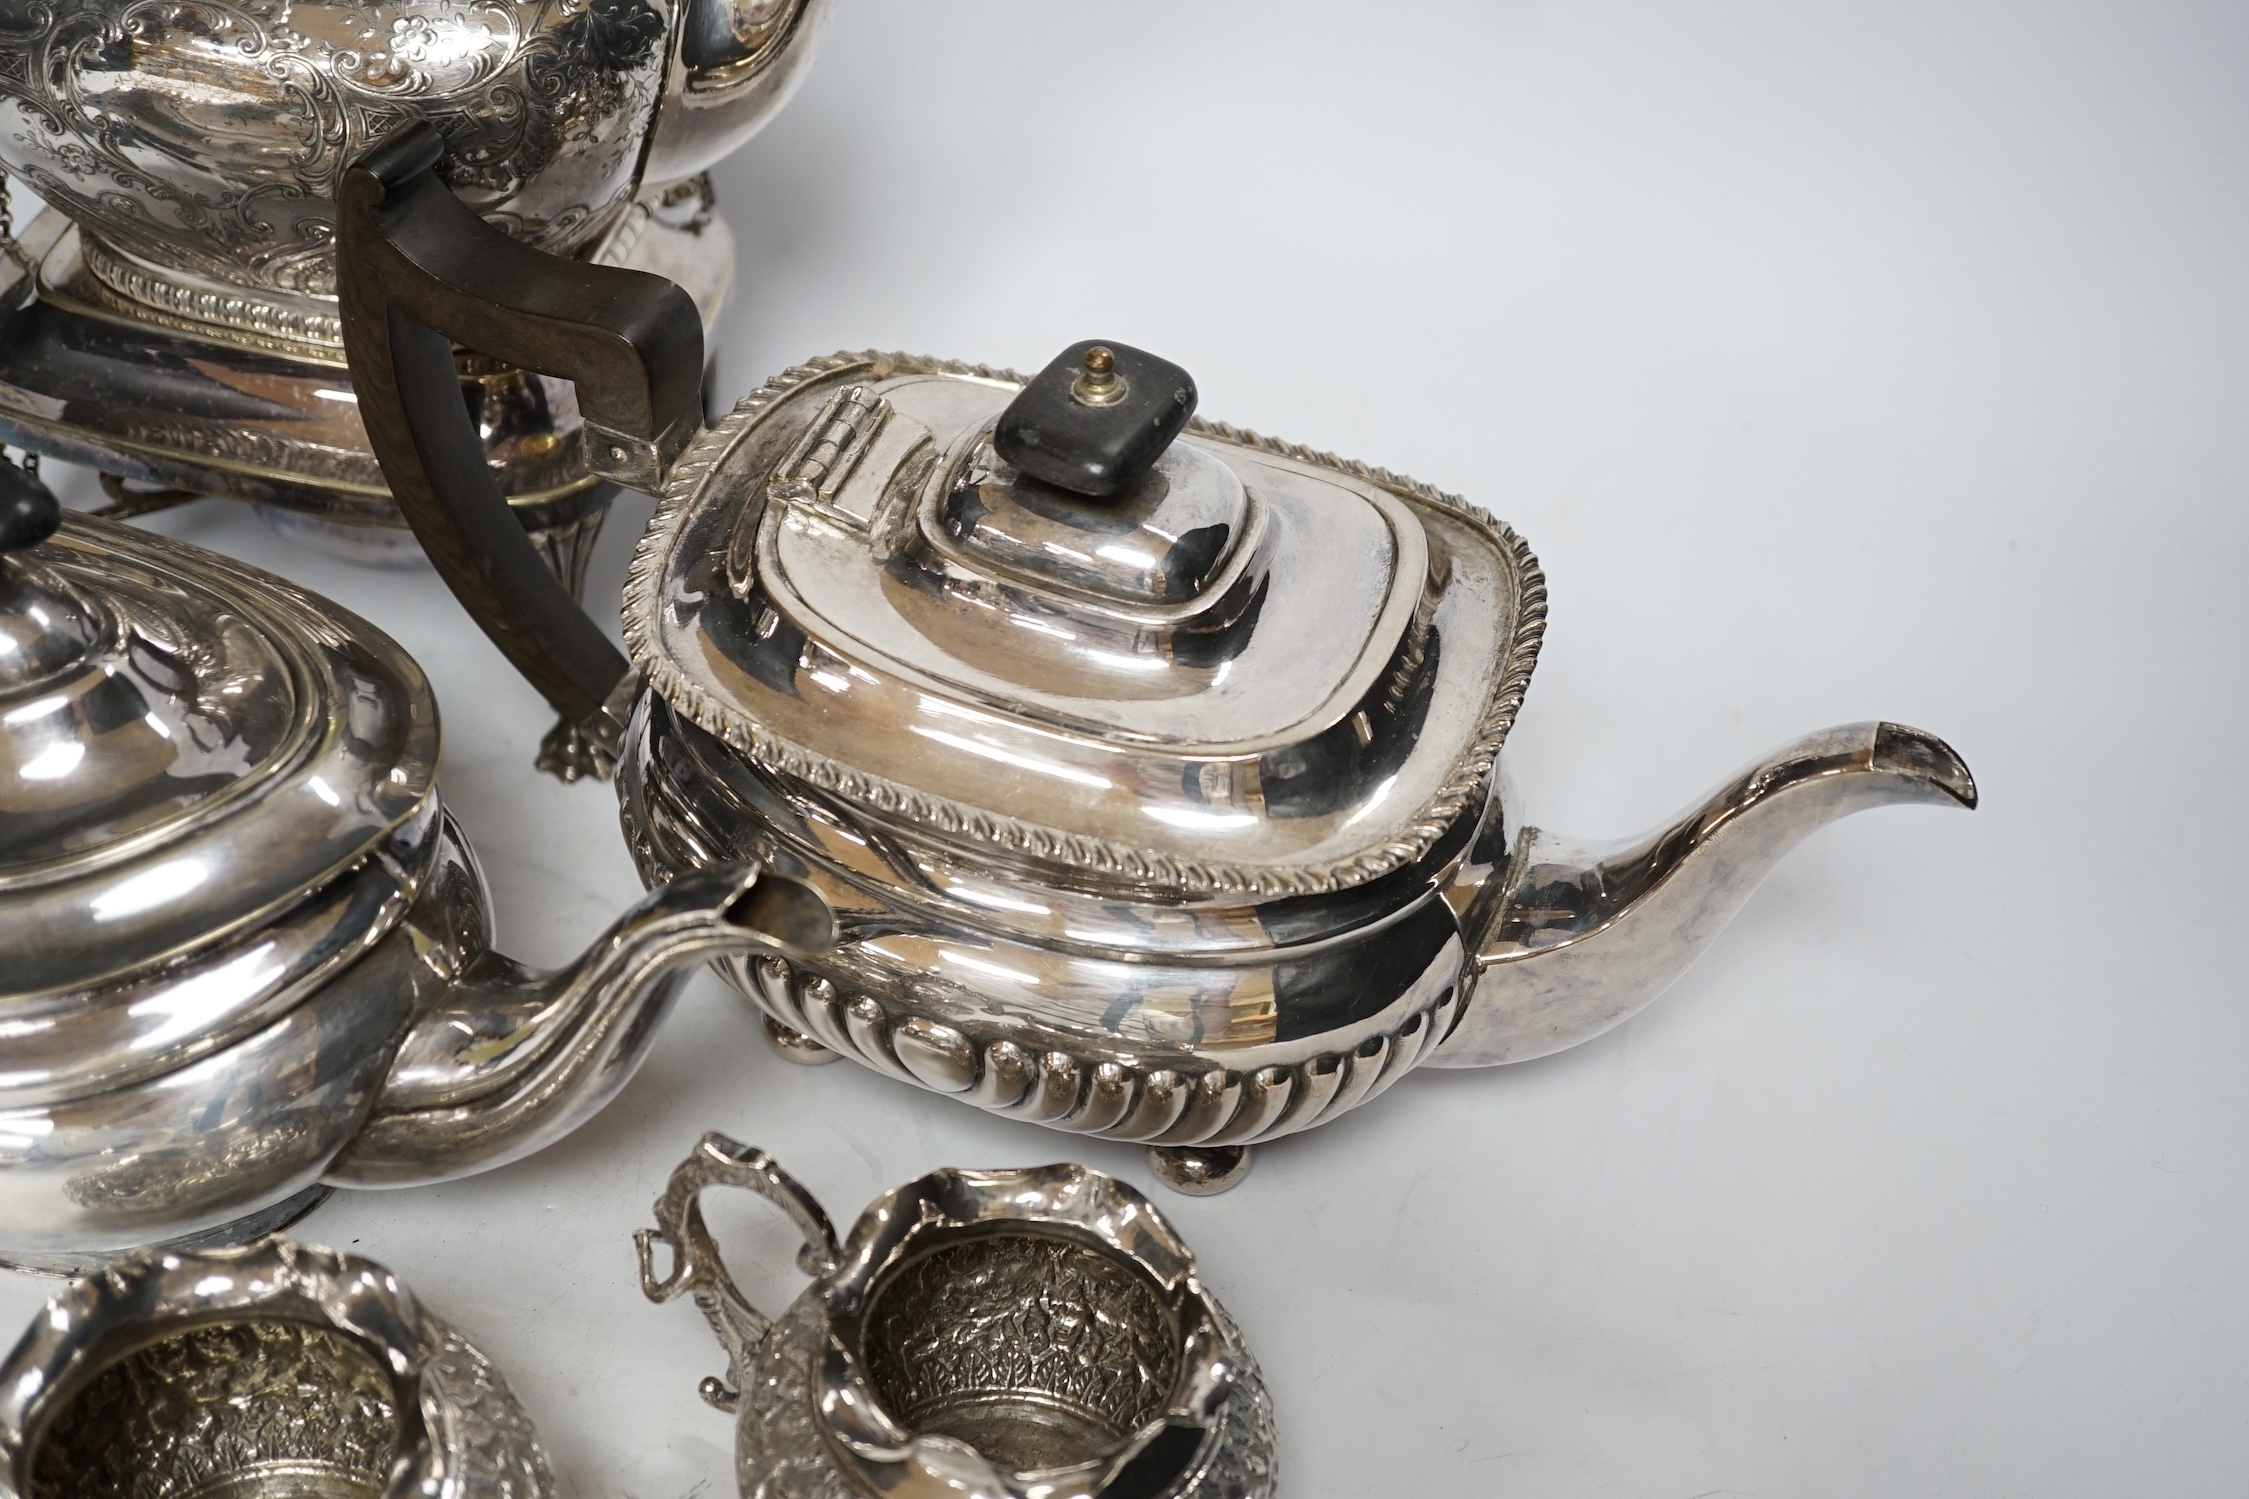 A plated kettle on stand, two plated teapots, a sugar bowl and a cream jug